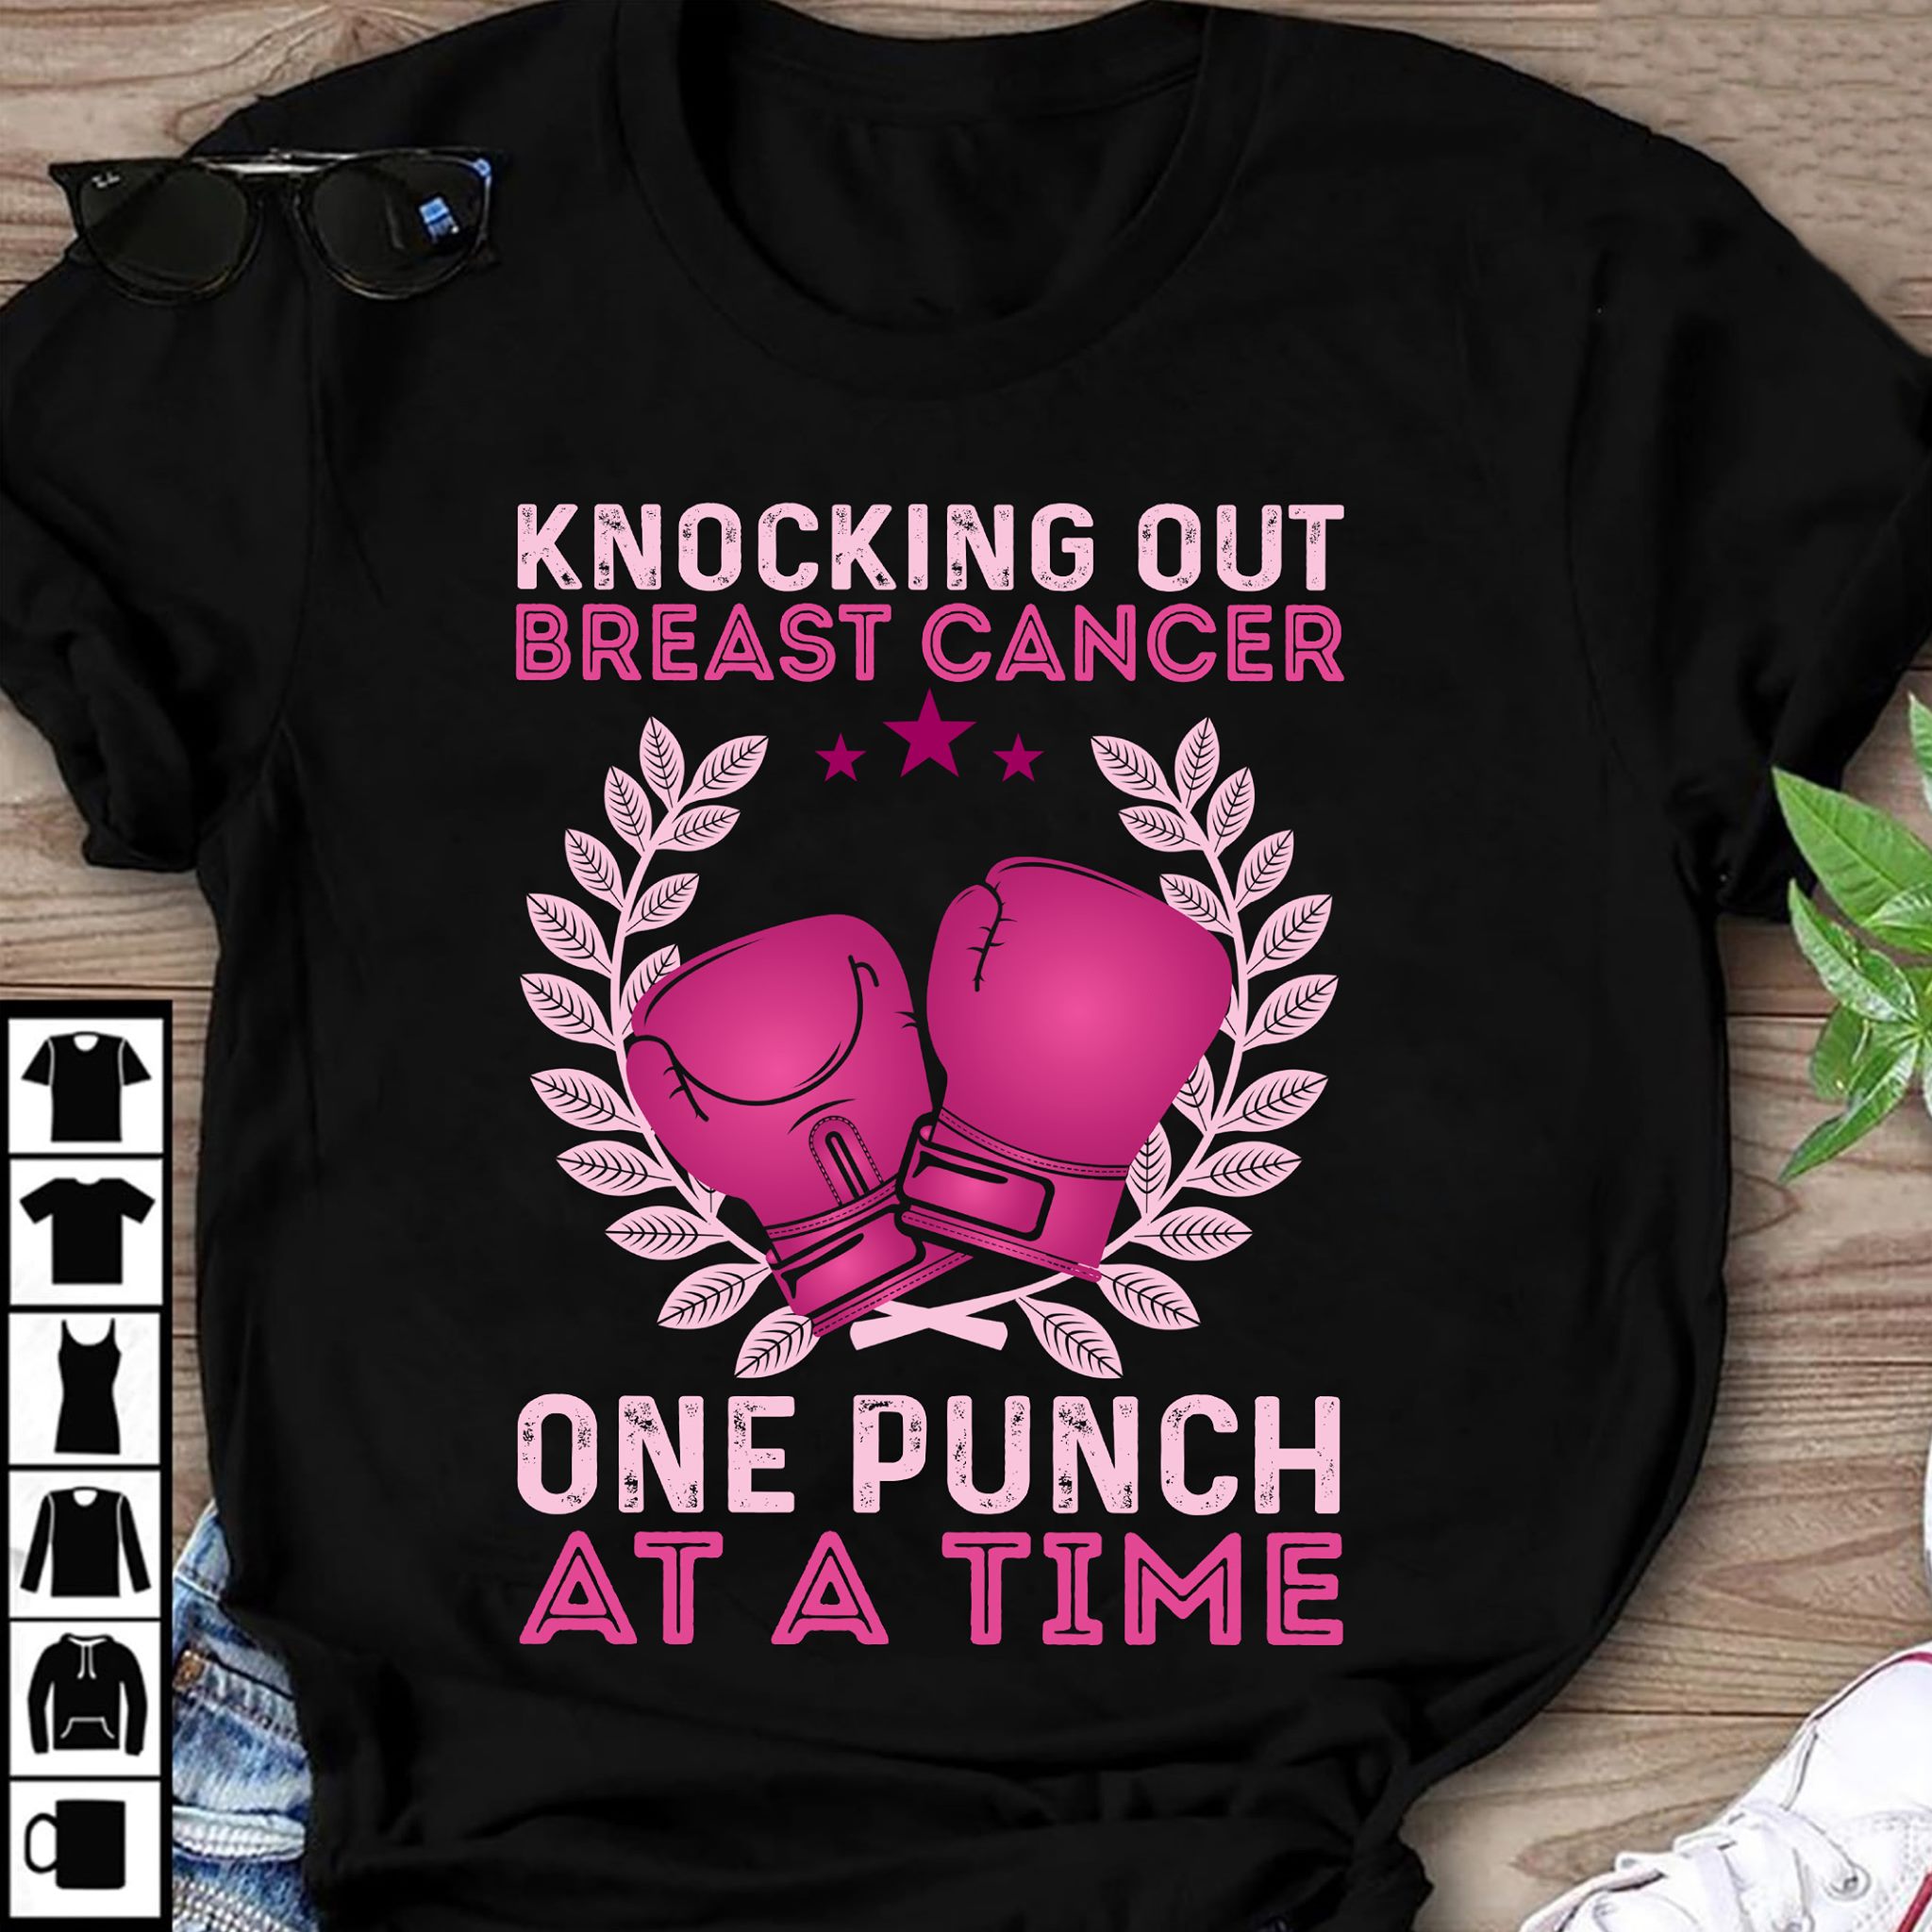 Knocking out breast cancer one punch at a time - Breast cancer awareness